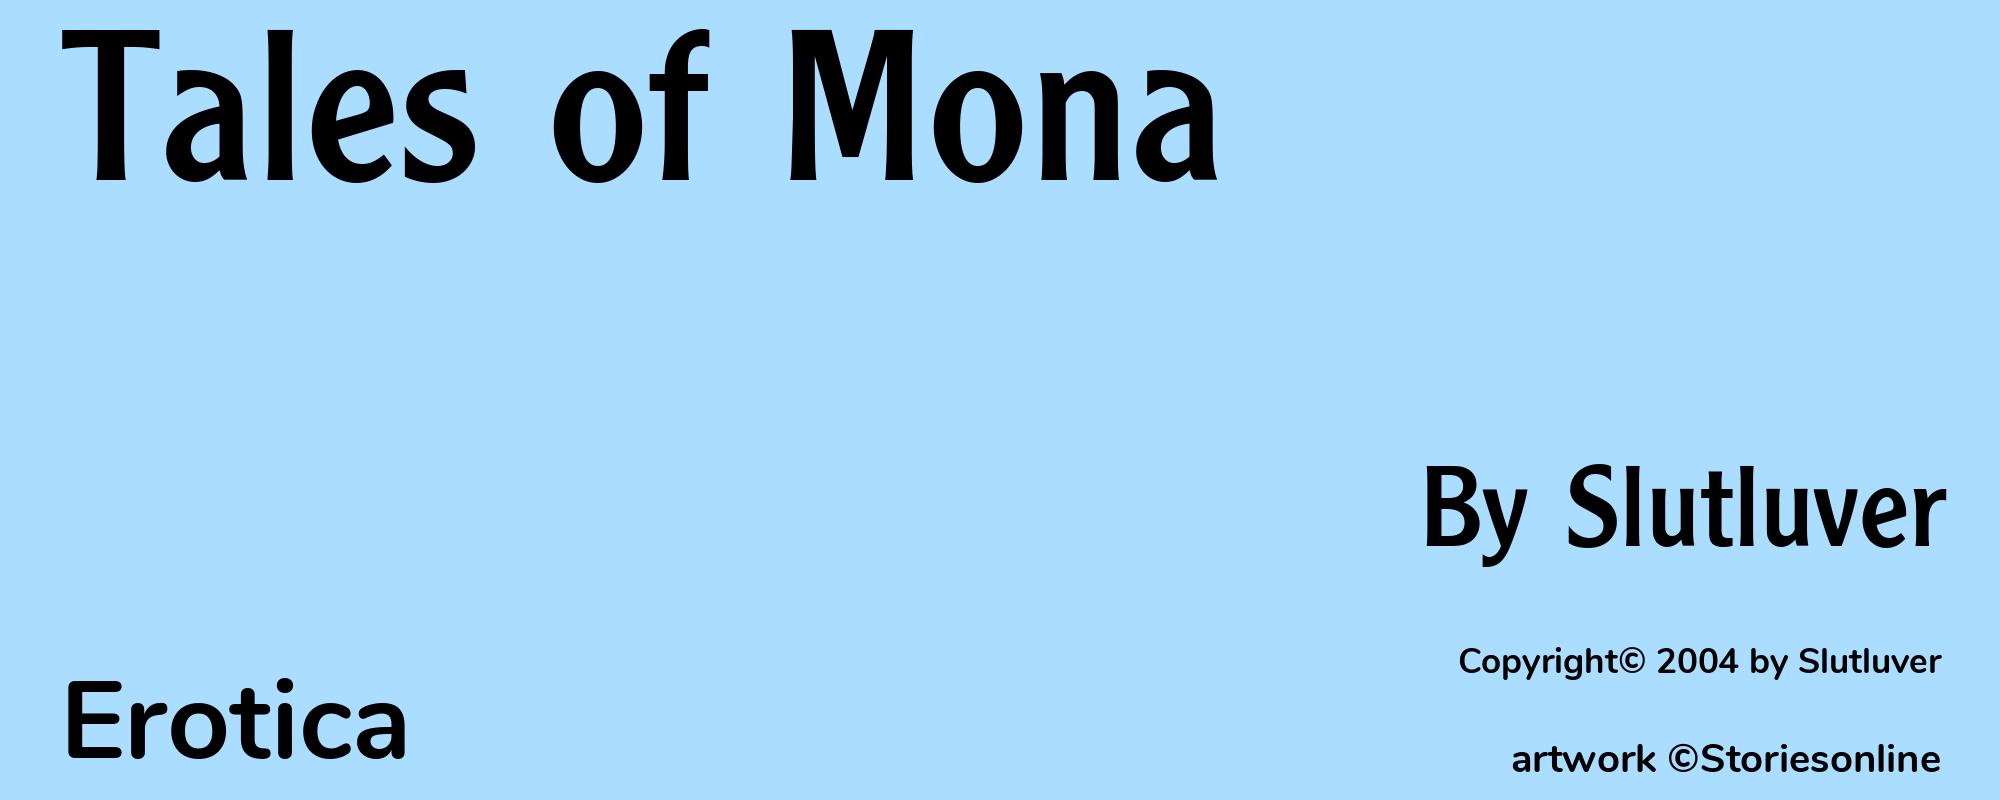 Tales of Mona - Cover